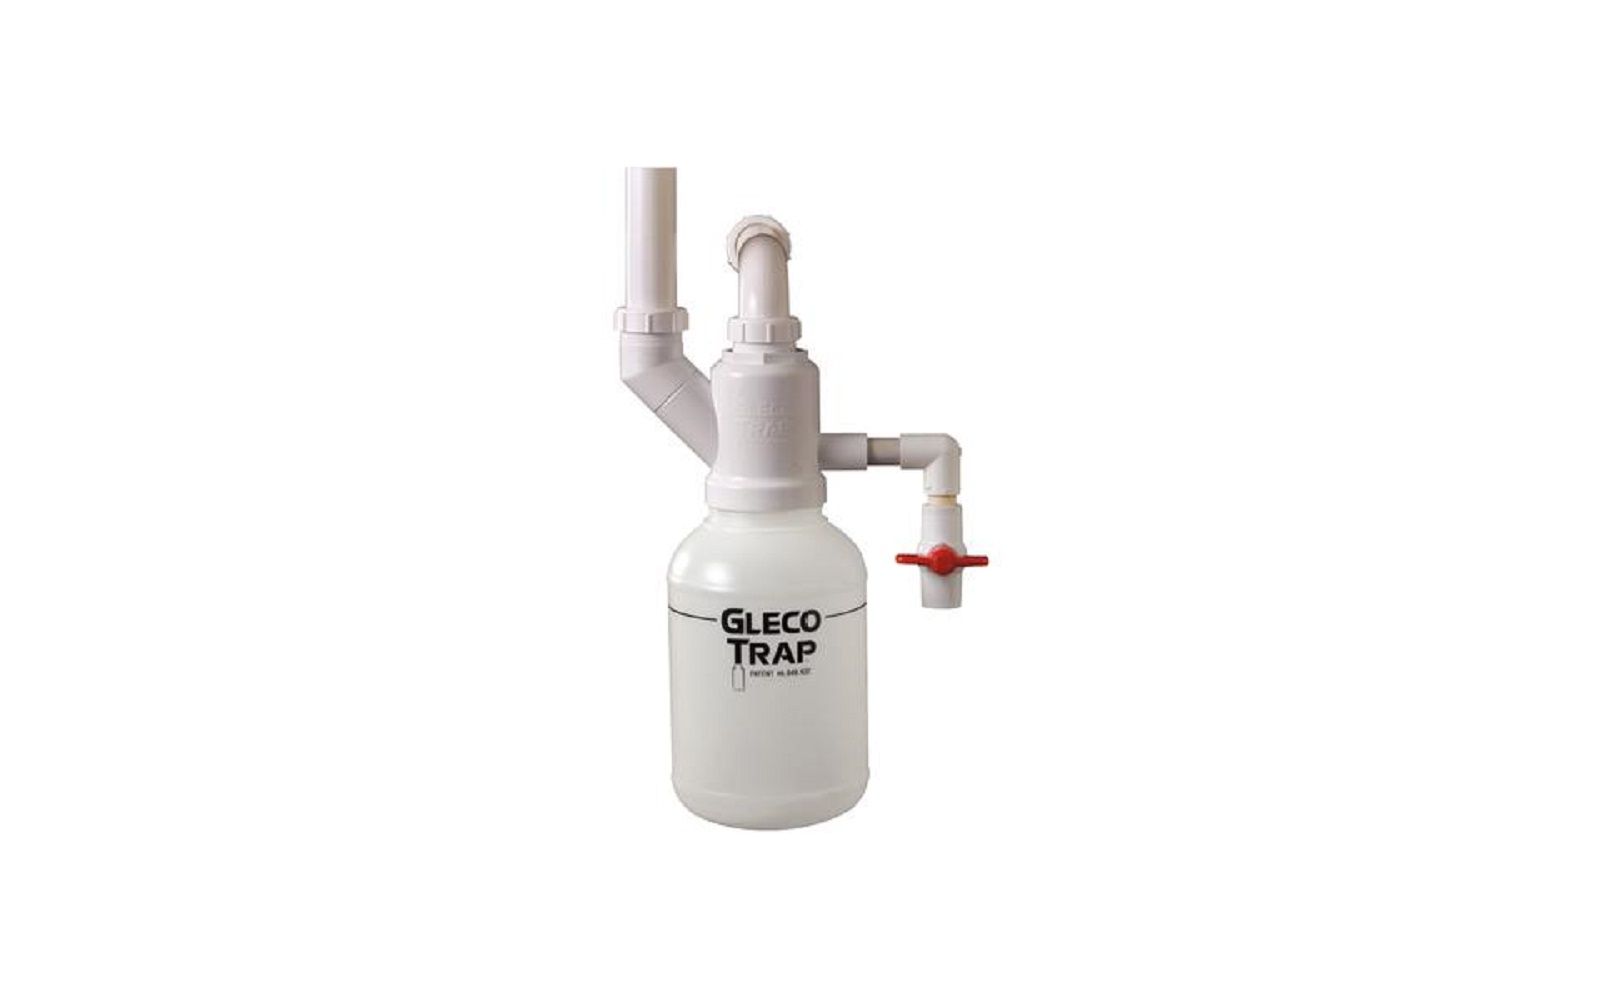 The gleco trap – gleco traps with 64 oz bottle